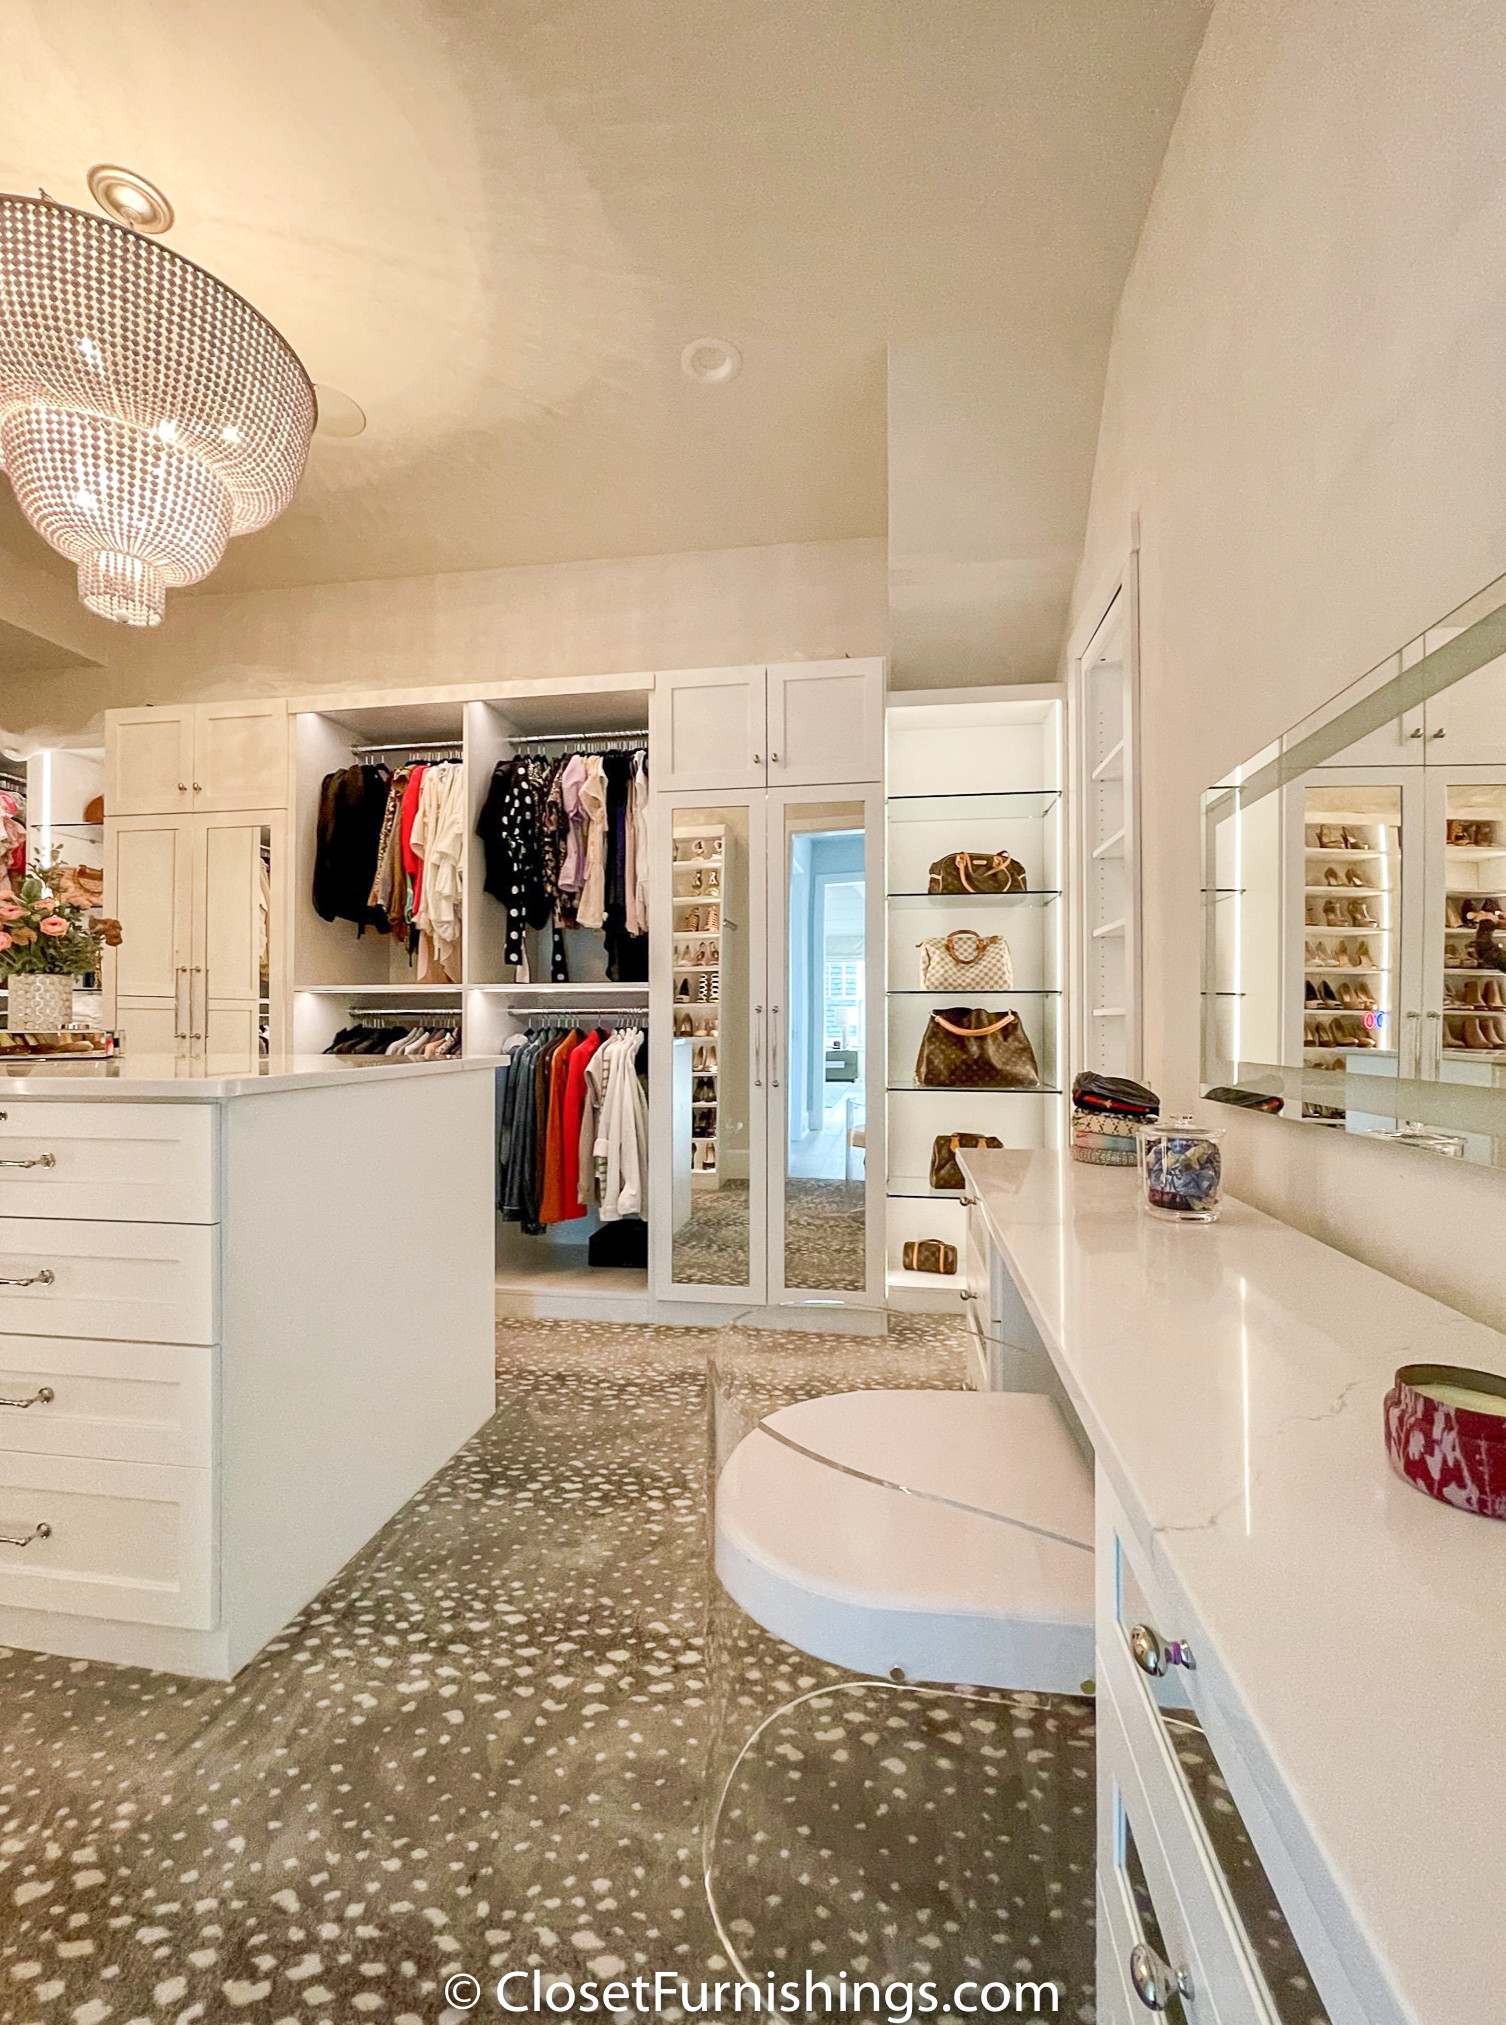 Hinsdale His and Hers Elegant Closets